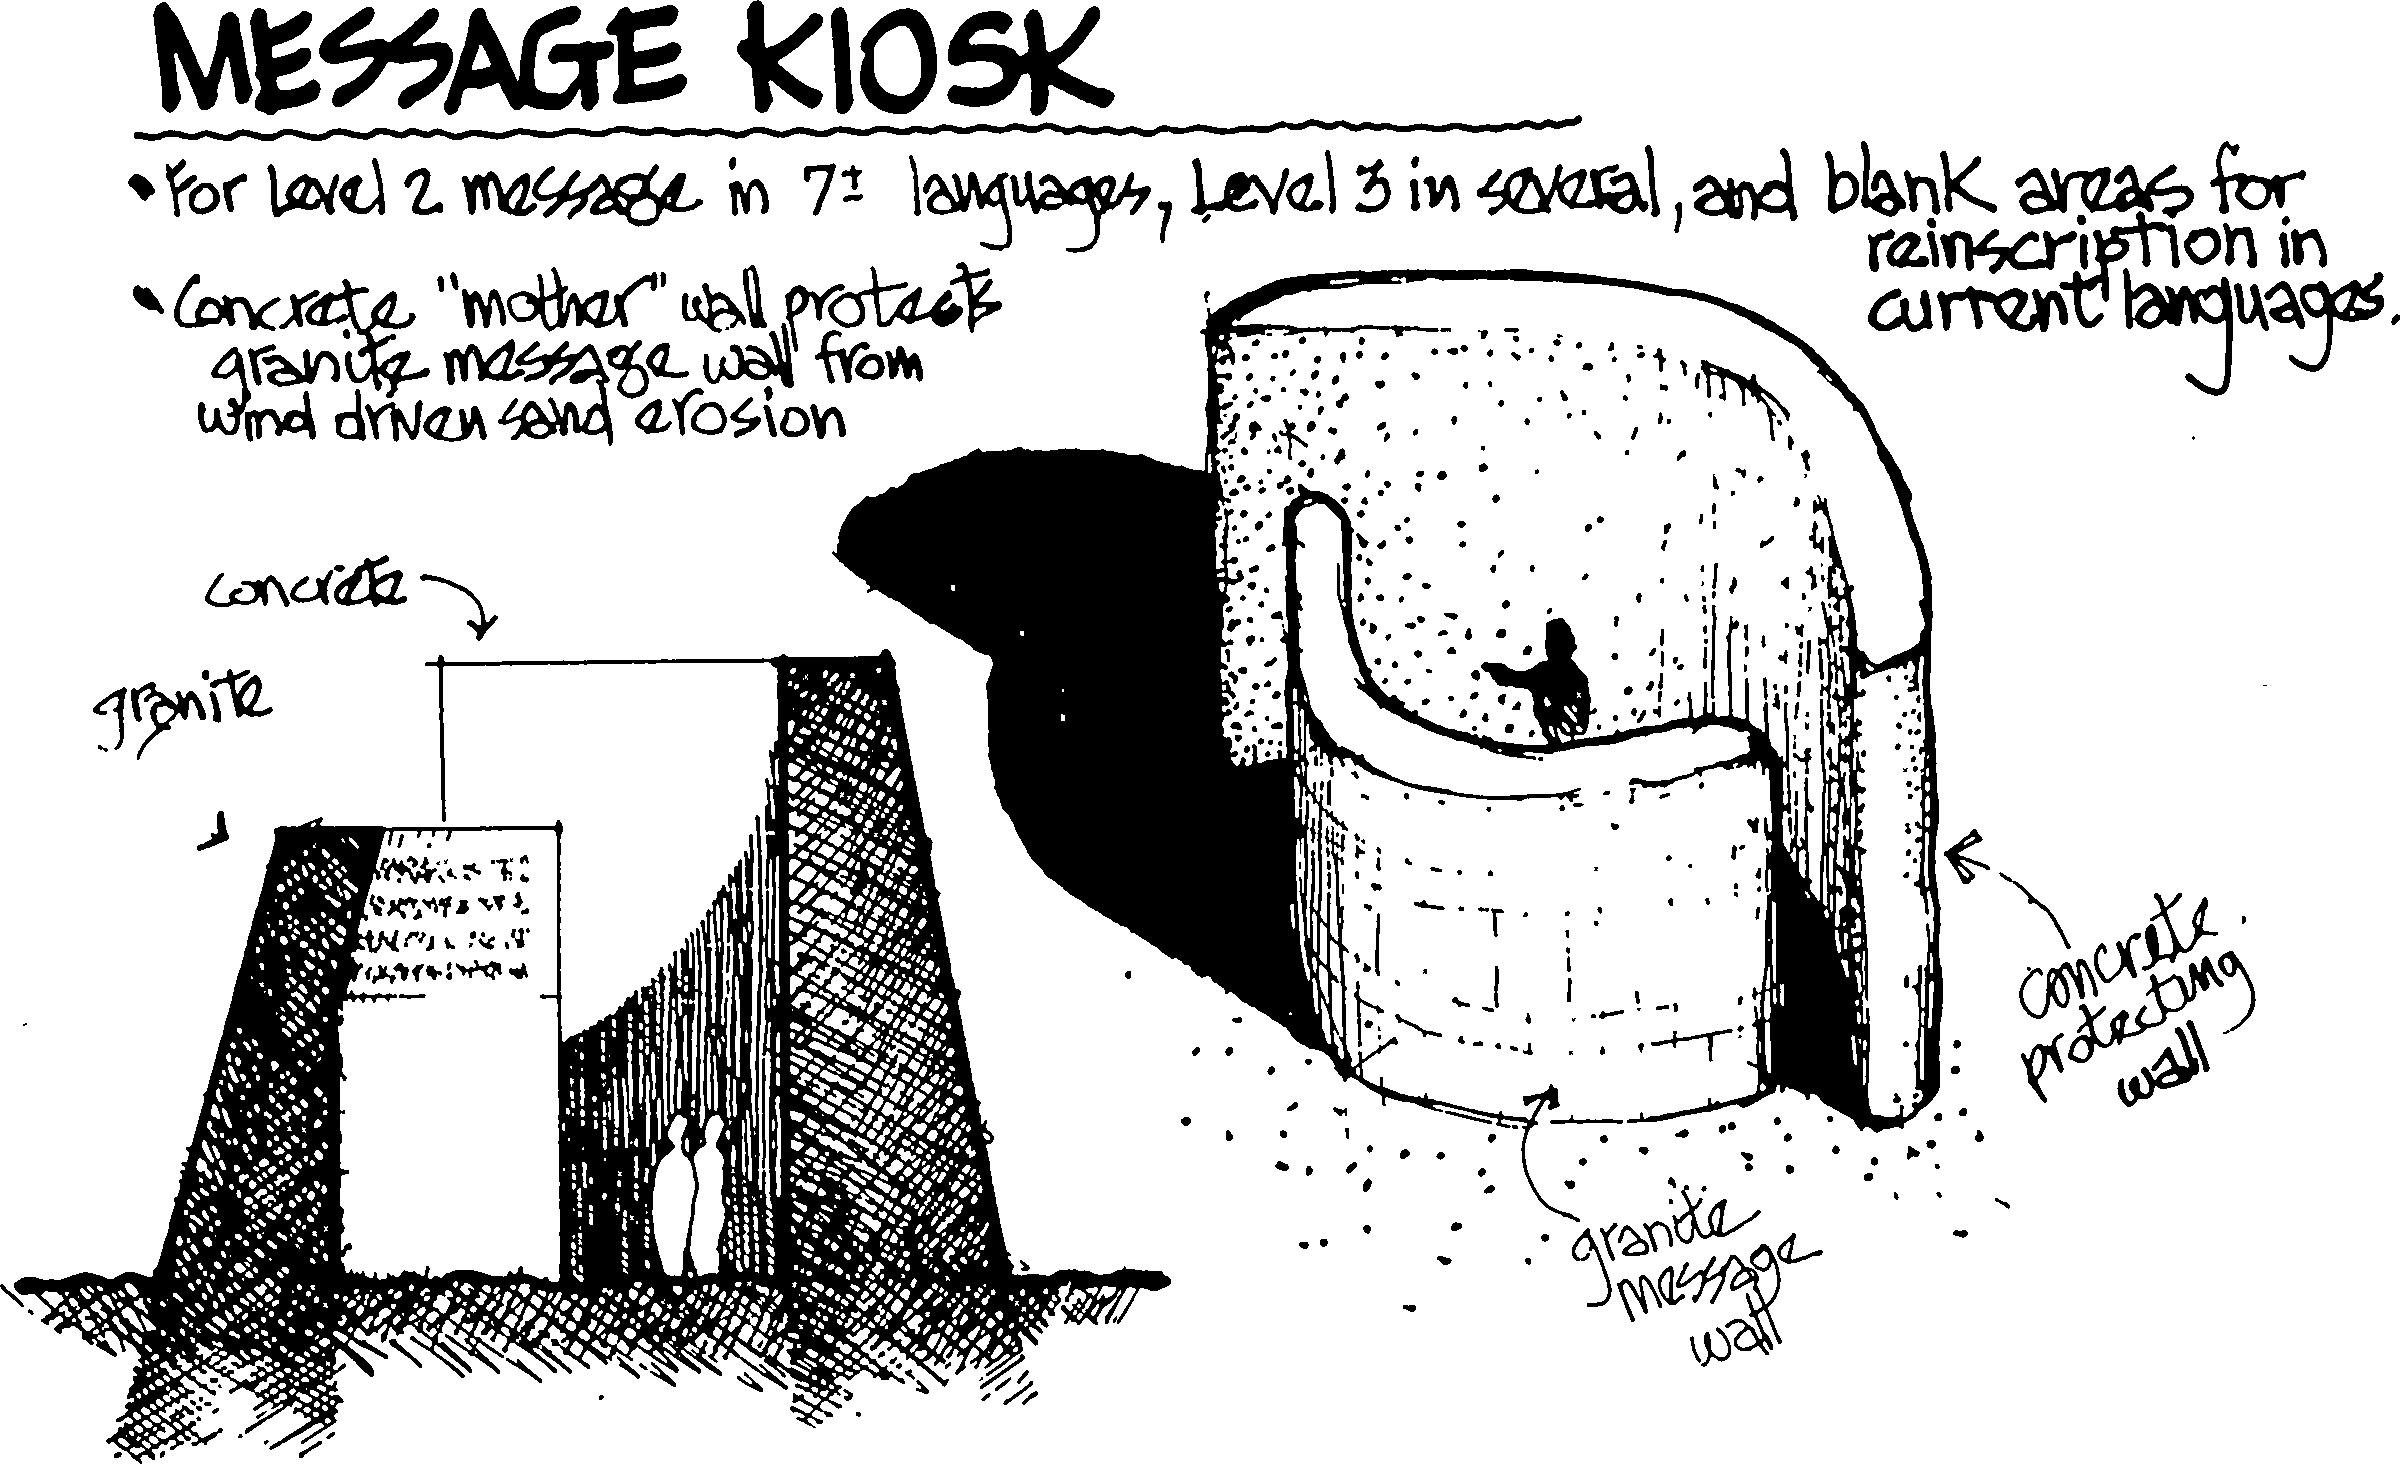 Sketch of a message kiosk for level 2 messages. The kiosk is made up of two curved walls which form an enclosed space which can be accessed from either side. The inside surfaces of the walls are inscribed with messages.